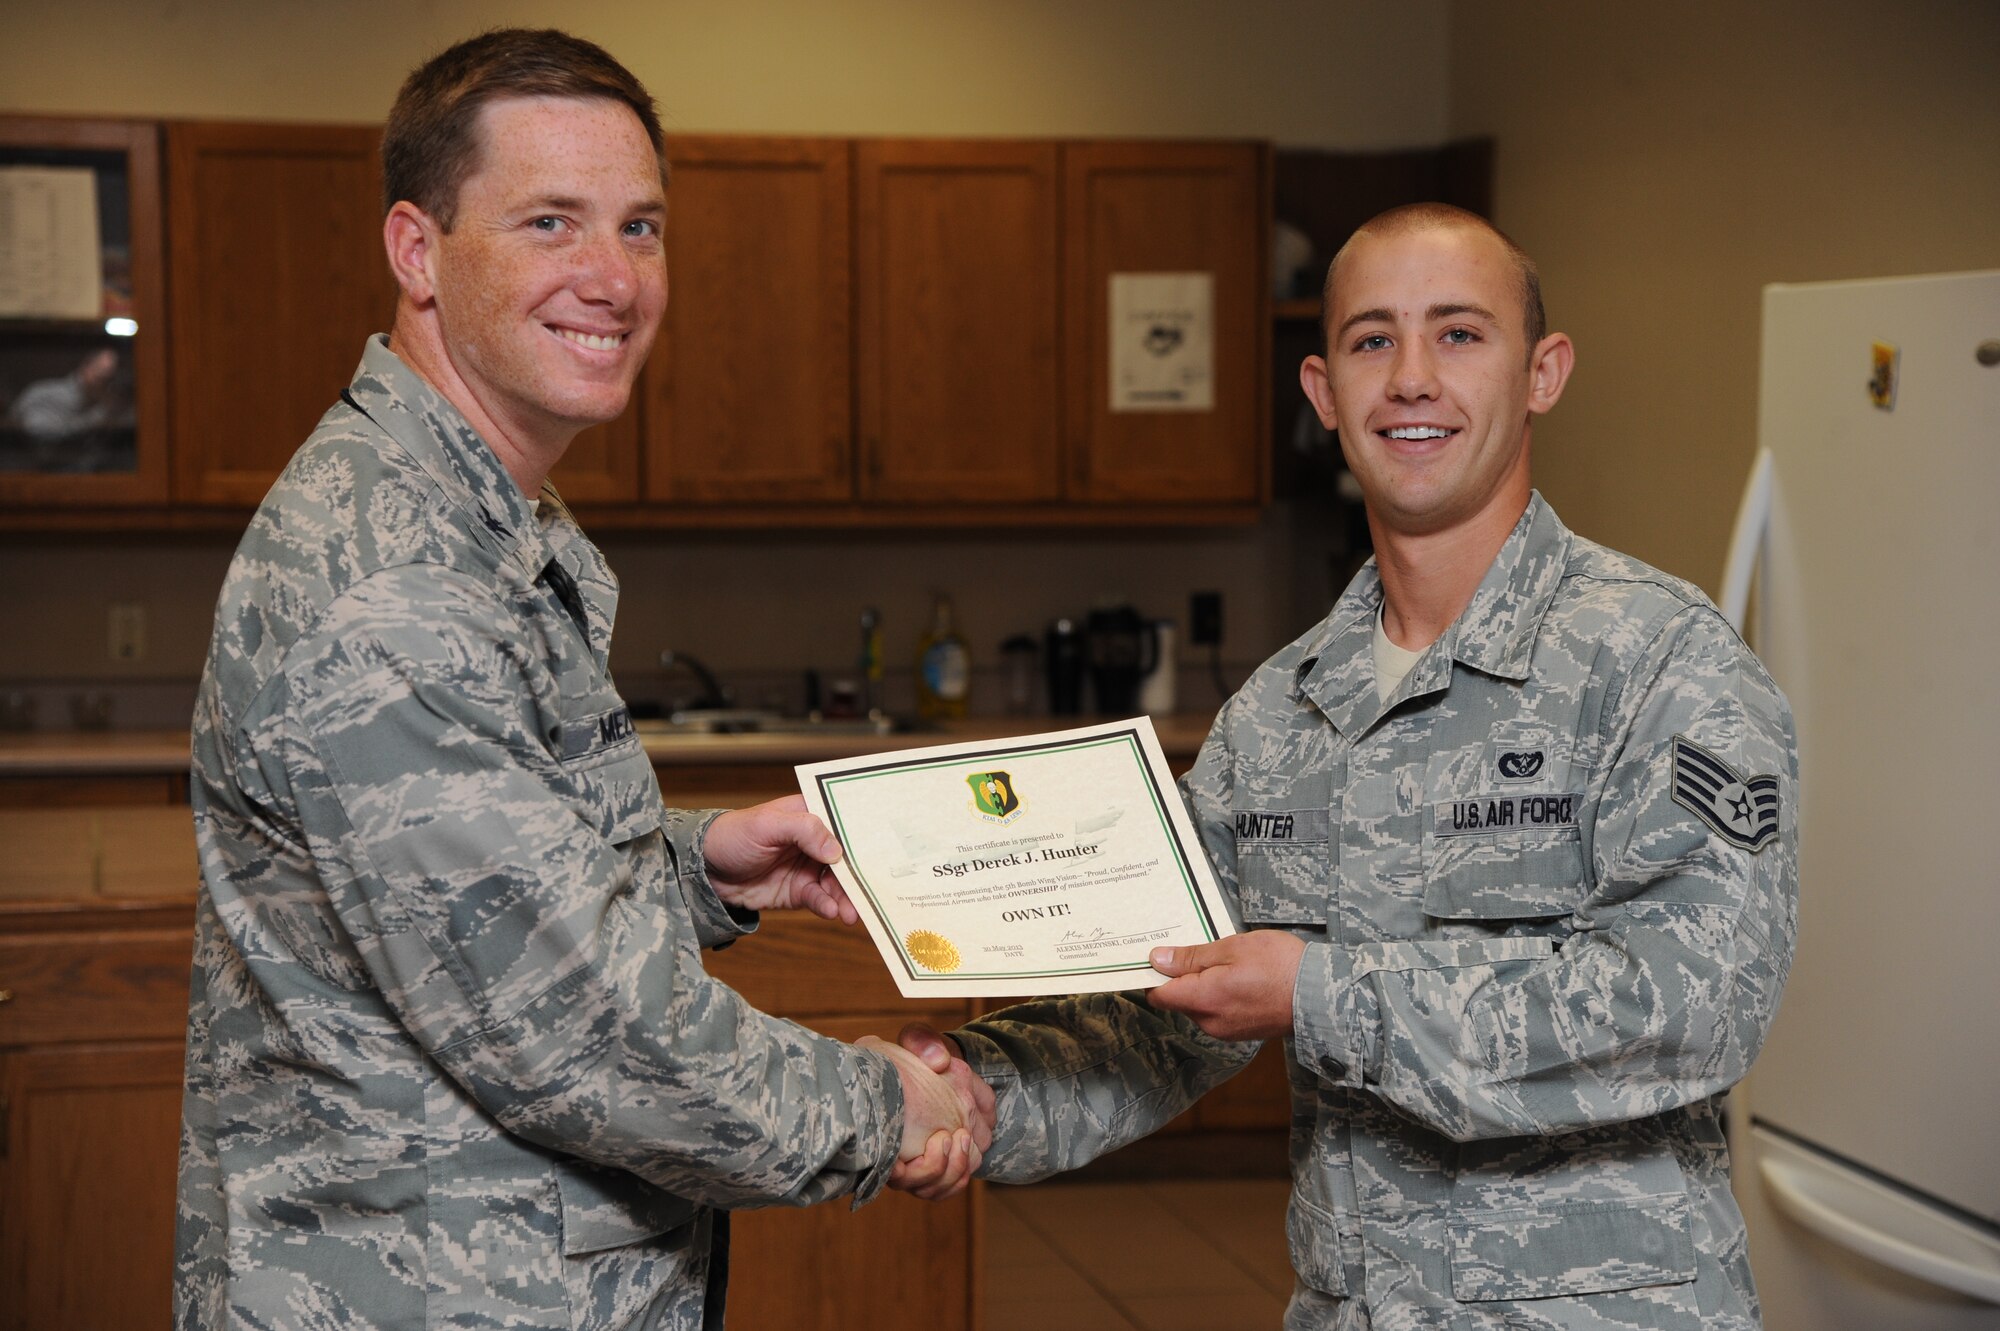 Col. Alexis Mezynski, 5th Bomb Wing commander, presents the OWN IT award to Staff Sgt. Derek Hunter, 5th Civil Engineer Squadron, here, July 1 , 2013. Sergeant Hunter has epitomized the 5th BW commander’s vision of mission ownership.  He was the lead craftsman responsible for the innovative solution planning and installation of the heating, ventilation and air conditioning direct digital controls at JR Rockers. This project saved $50,000 in contract costs and paved the way for the advanced HVAC technology to be installed across the installation. The DDC system will enable technicians to remotely access, monitor and troubleshoot temperature and humidity controls from a centralized location, saving 480 man-hours and 220,000 kilowatts in energy annually. His hard work and leadership set the foundation to expand the development of this technology to seven additional buildings on base.  Finally, Hunter has quickly become the foremost DDC expert and diligently trained 35 military personnel in this high-tech discipline. Congratulations Sergeant Hunter for OWNing your mission. (U.S. Air Force photo/Airman 1st Class Andrew Crawford)